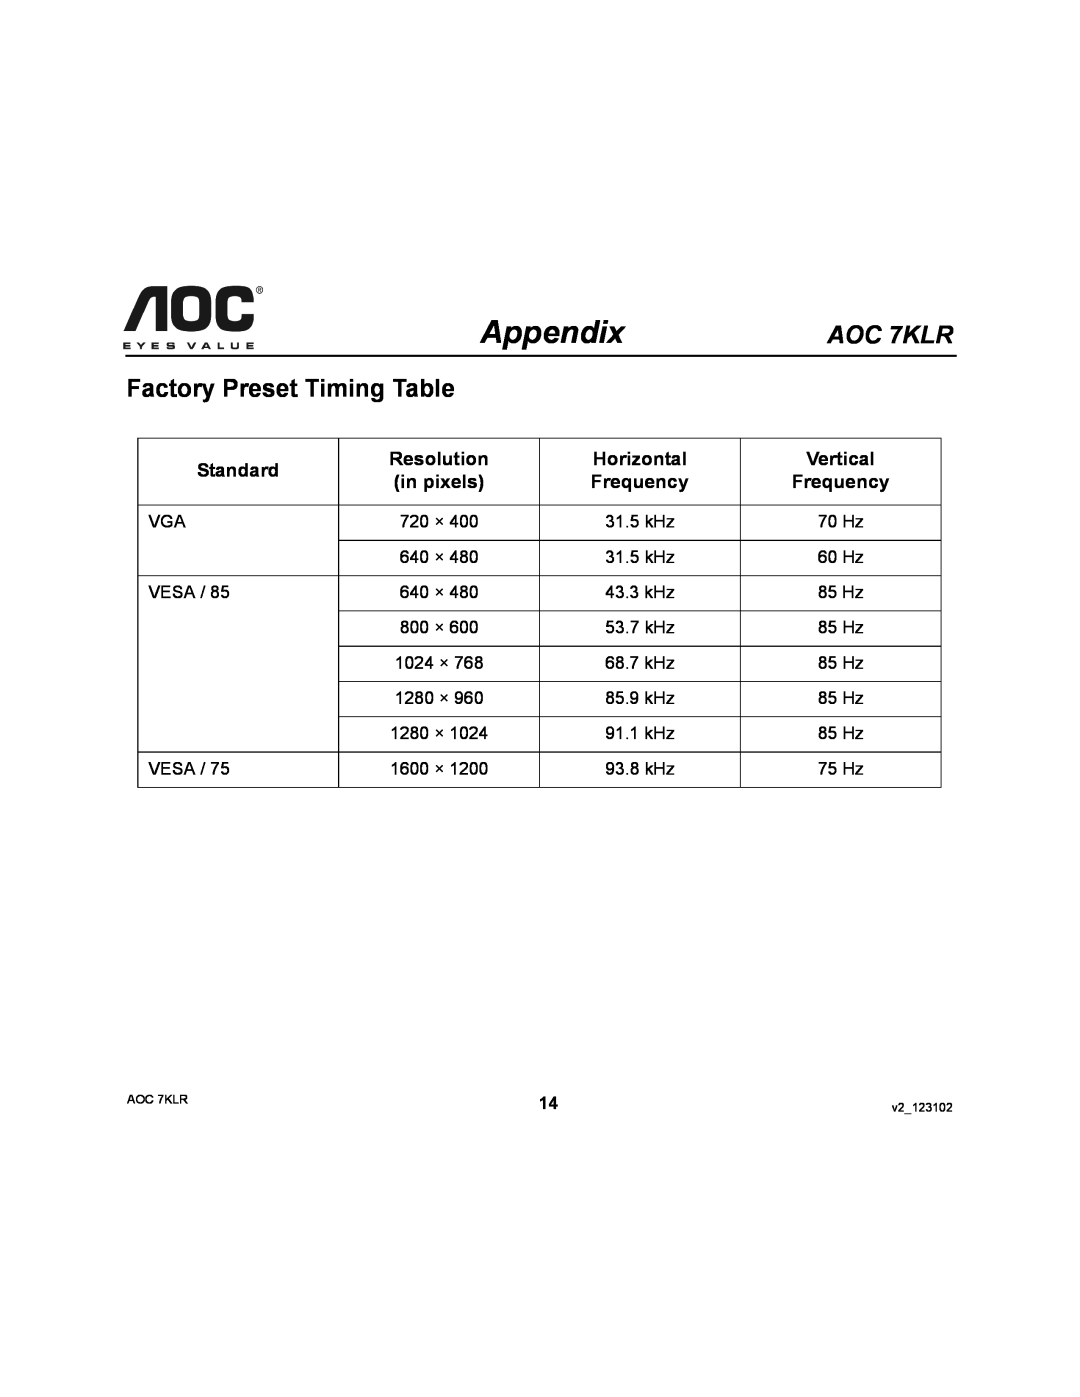 AOC Factory Preset Timing Table, Standard, Appendix, AOC 7KLR, Resolution, Horizontal, Vertical, in pixels, Frequency 